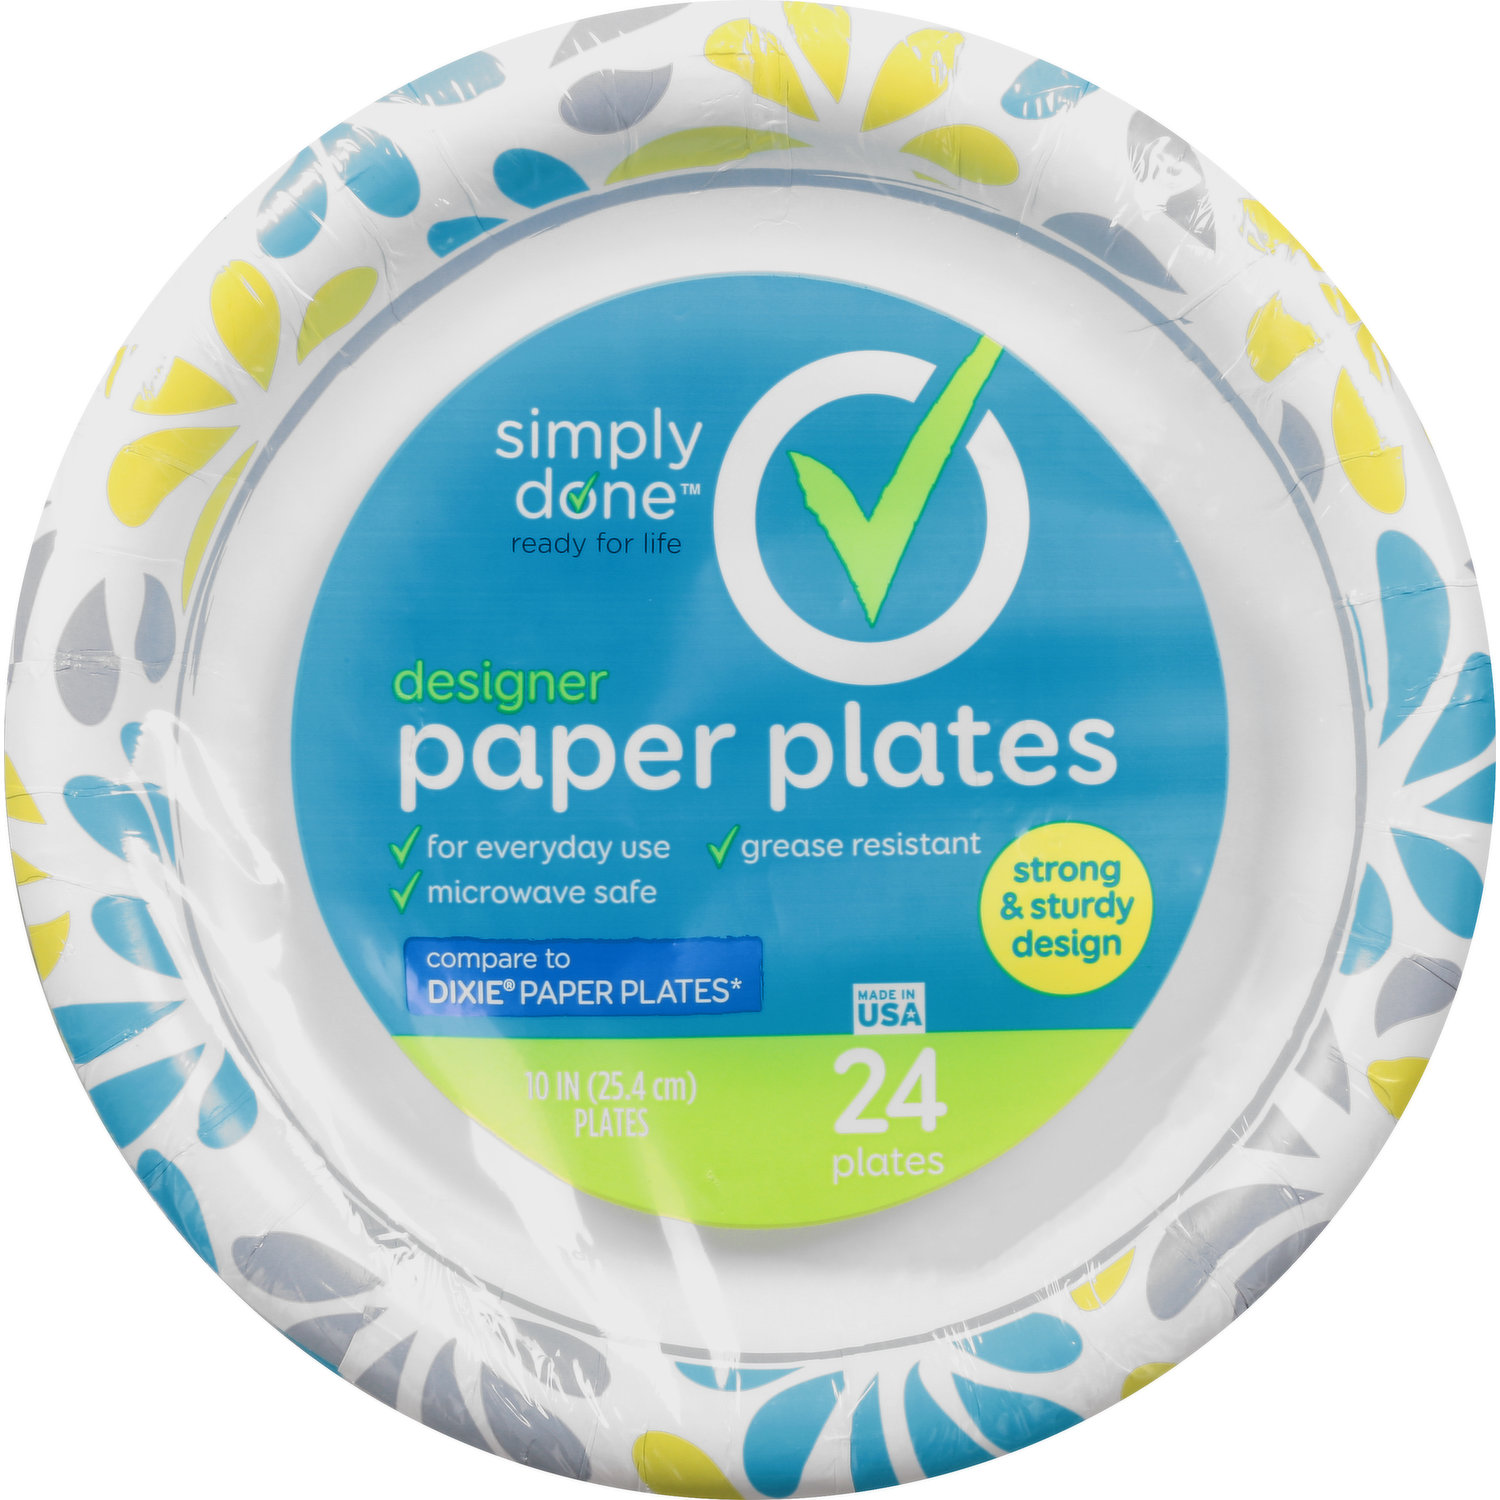 Simply Done Paper Plates, Heavy Duty, Designer